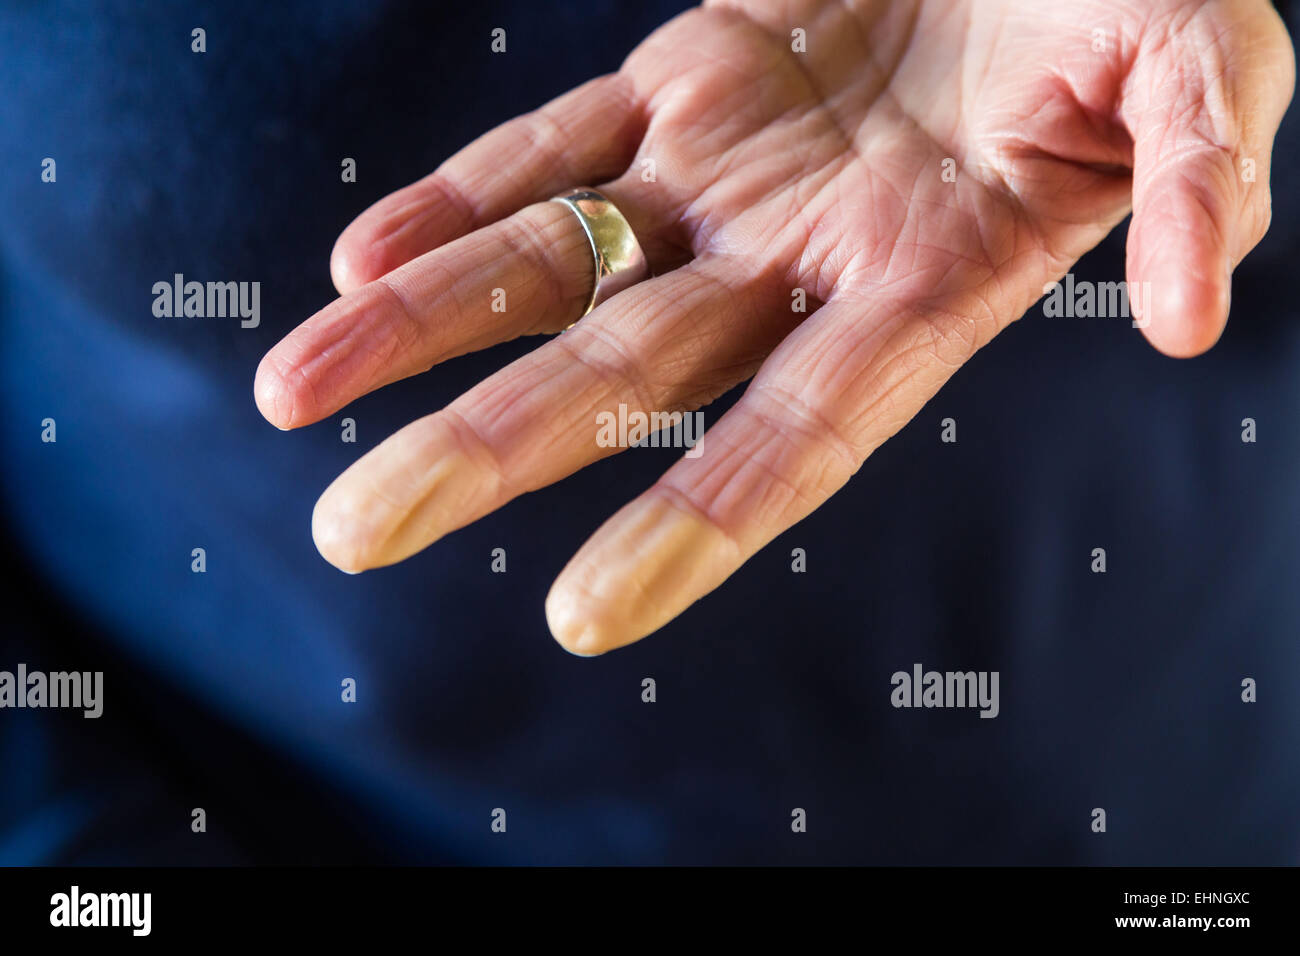 Woman's hand of a Raynaud's syndrome suffere. Stock Photo